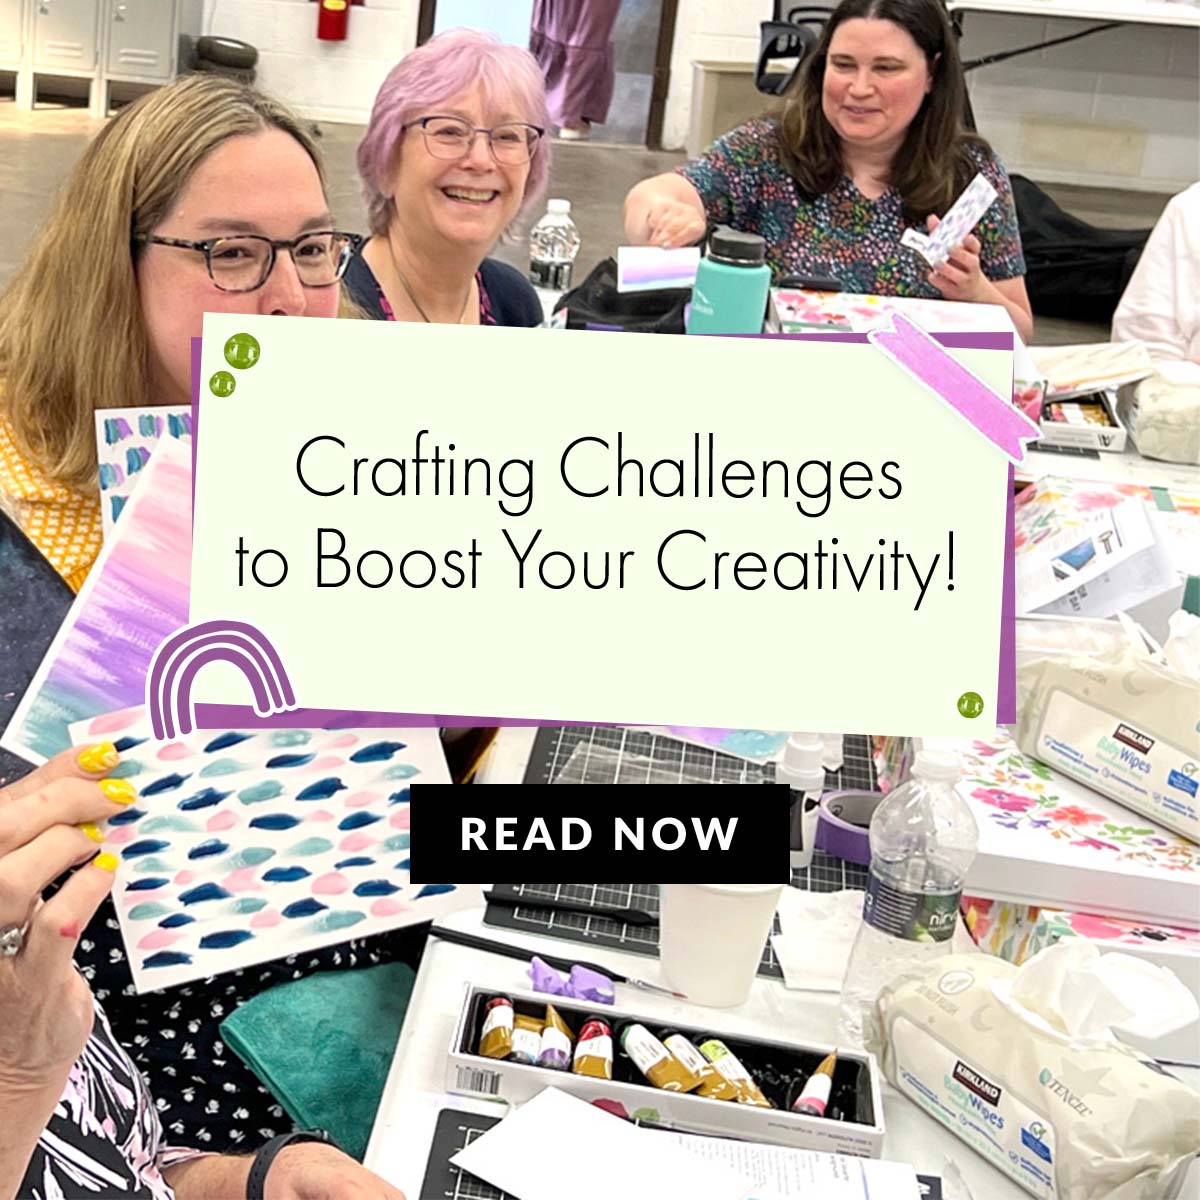 How Crafting Challenges Boost Your Creativity